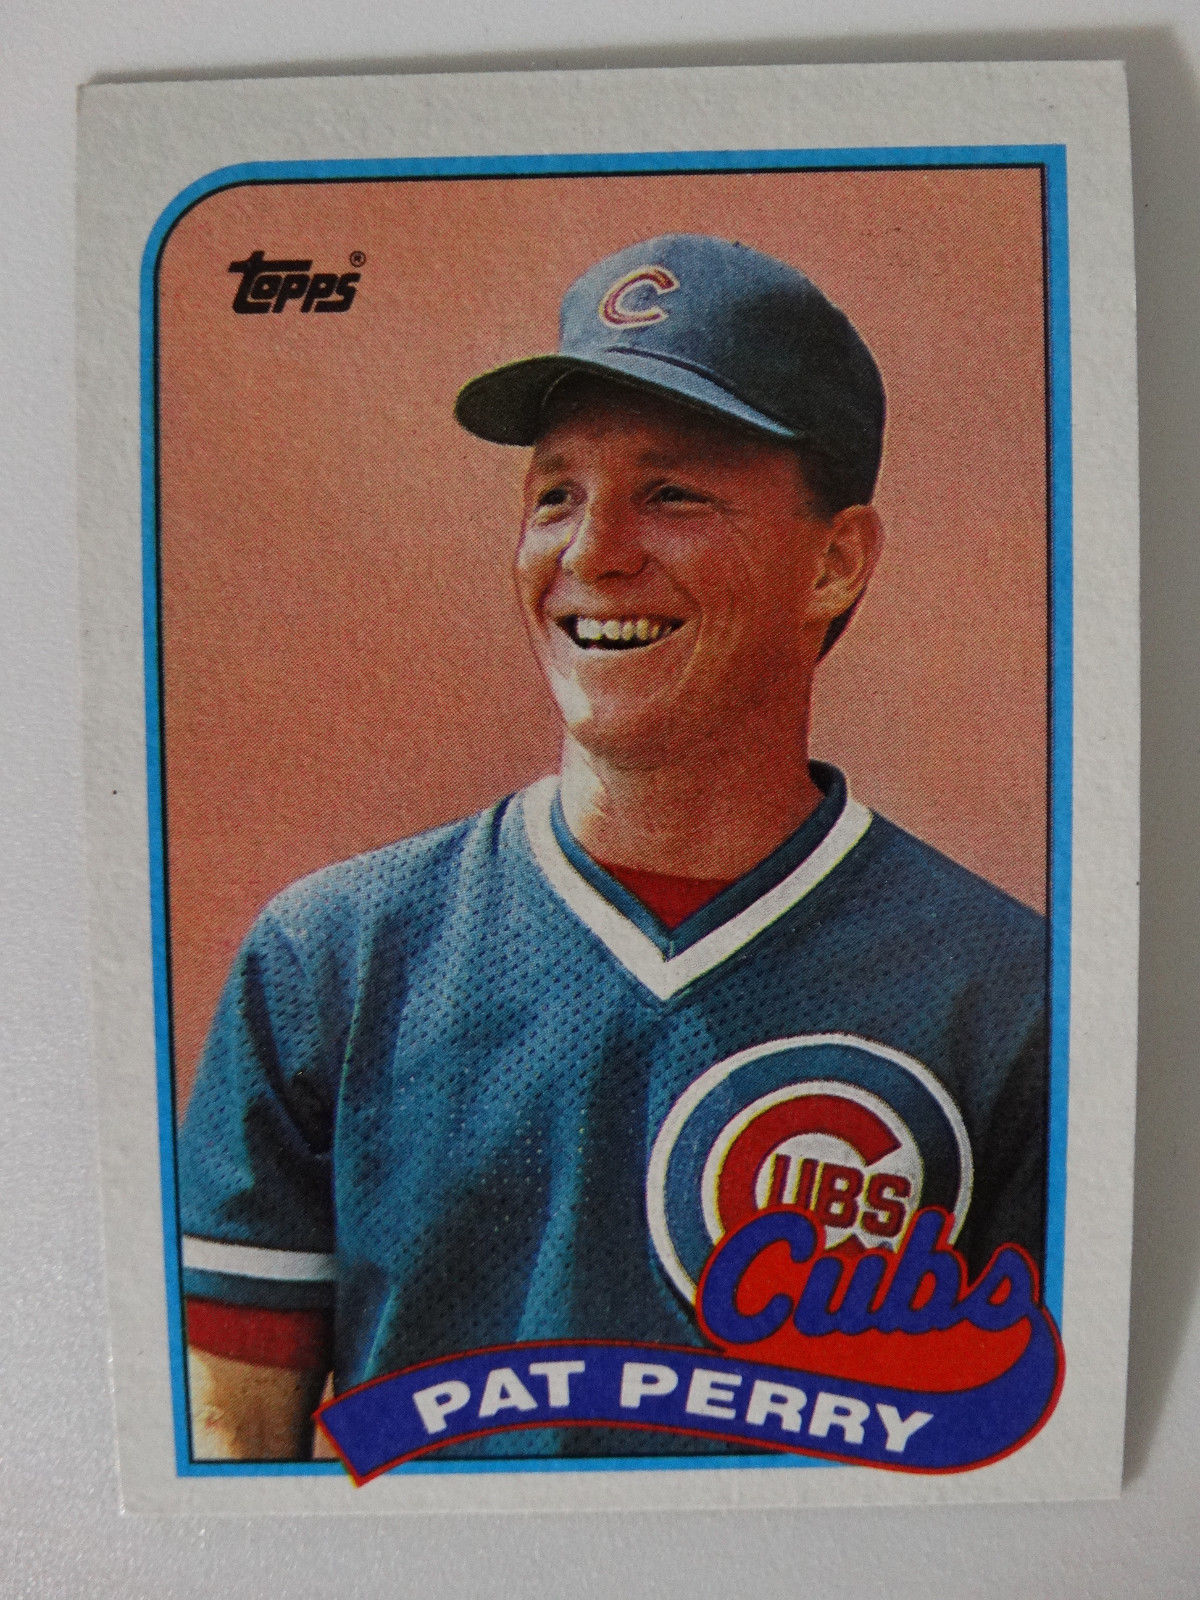 Primary image for 1989 Topps Pat Perry Chicago Cubs Wrong Back Error Baseball Card